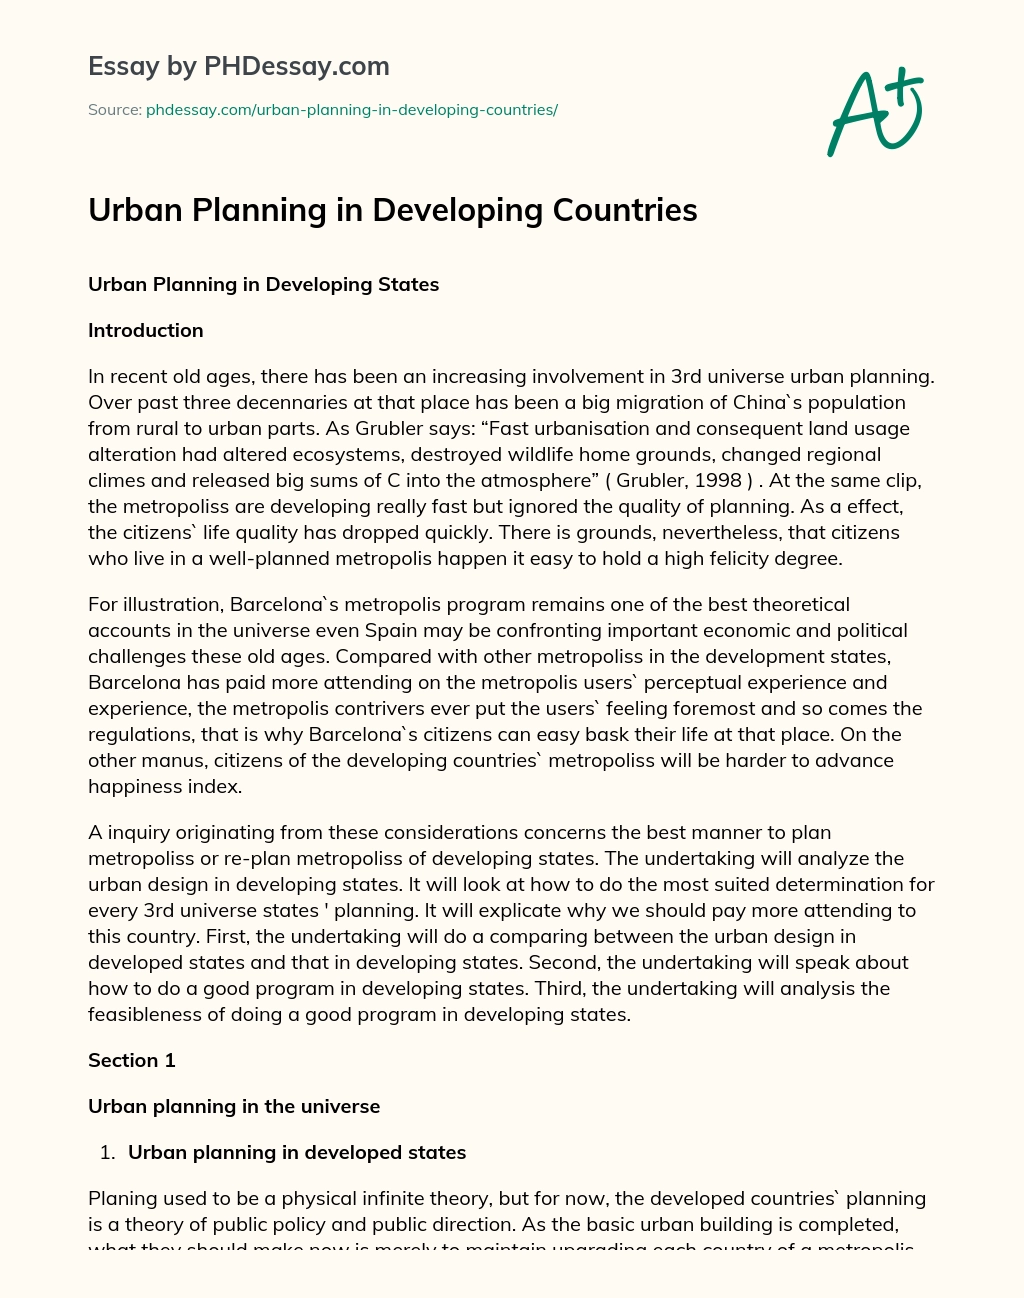 Urban Planning in Developing Countries essay